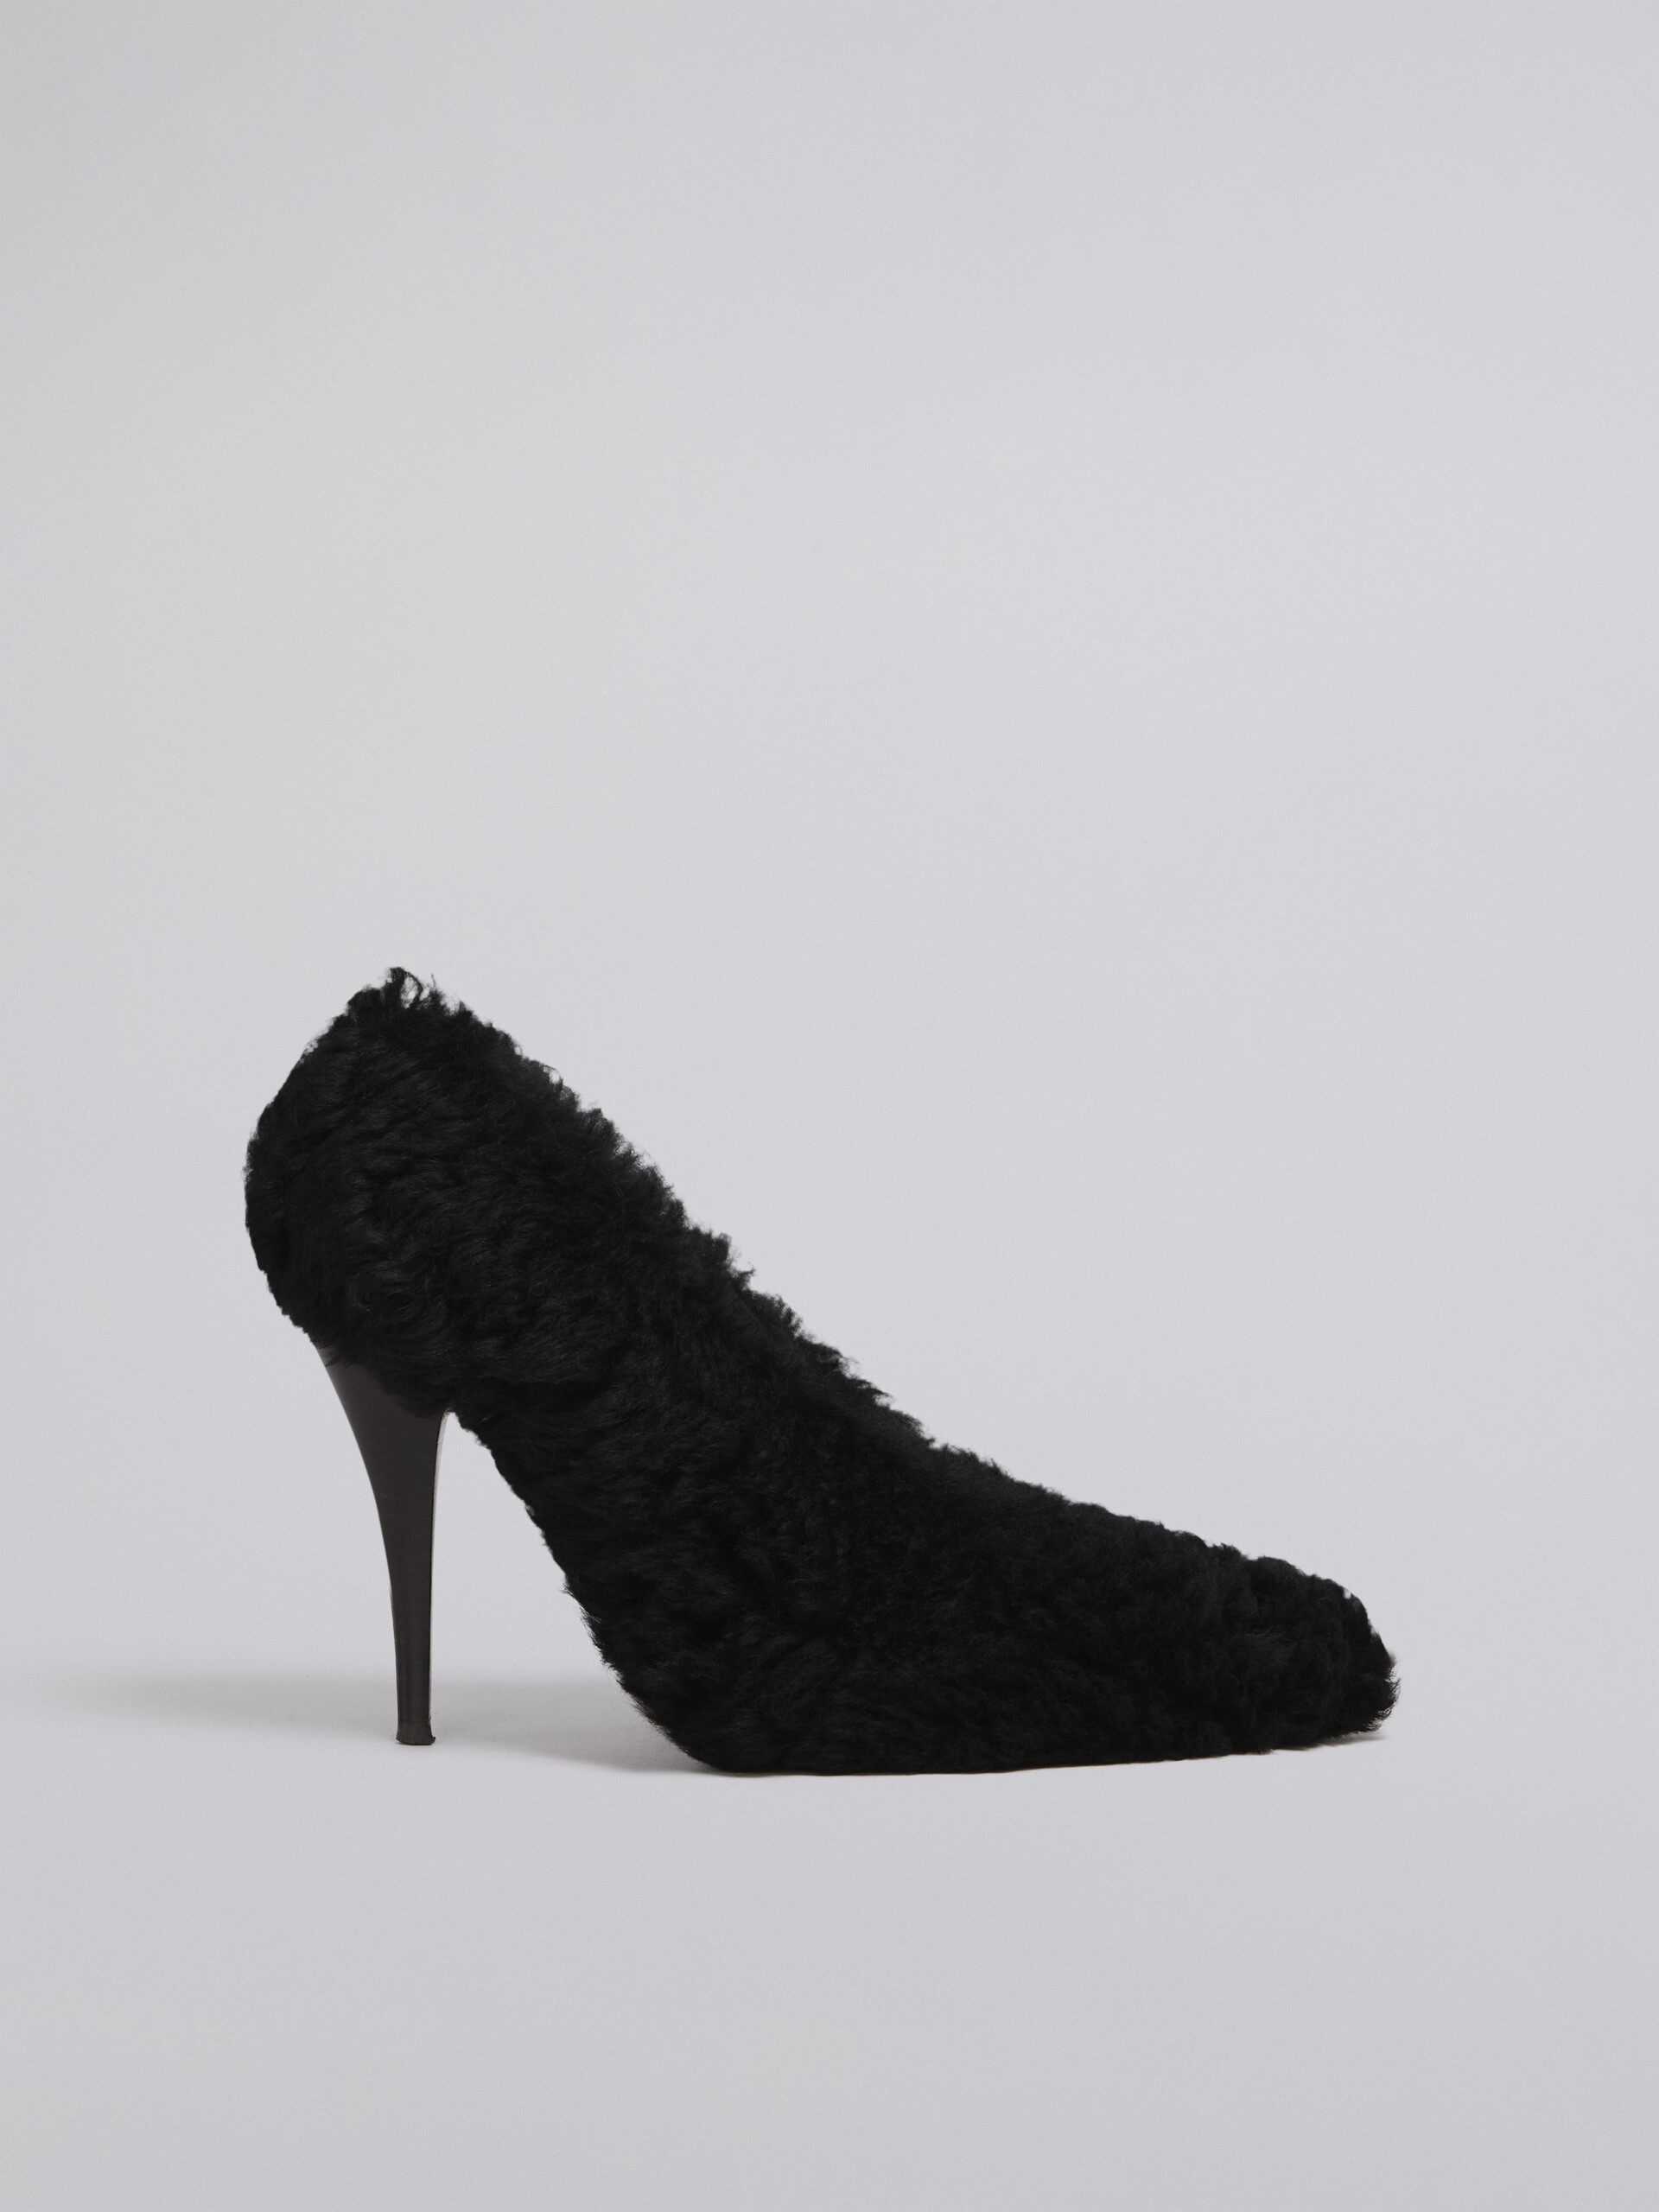 Shearling pump with heel covered in nappa - Pumps - Image 1